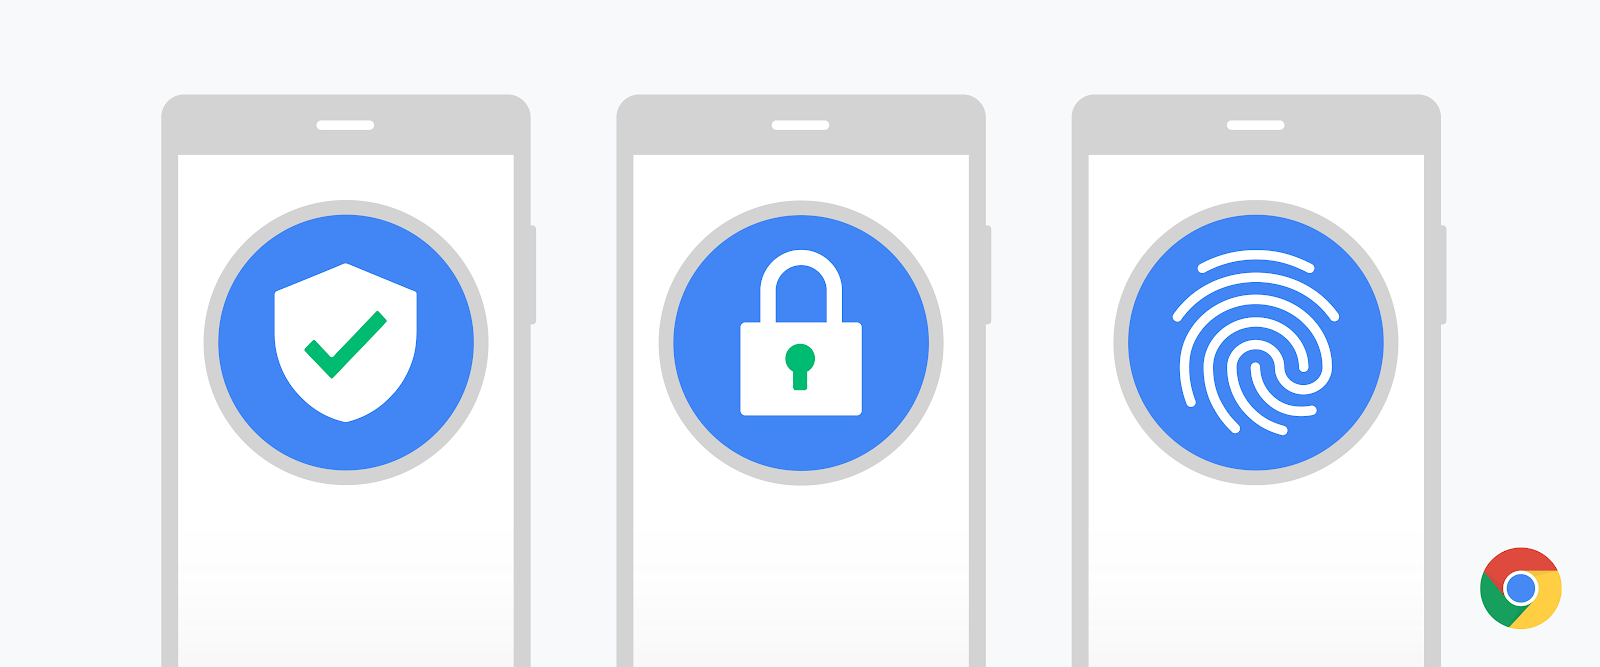 Google Password Manager for Android and Chrome is getting a new, more consistent UI